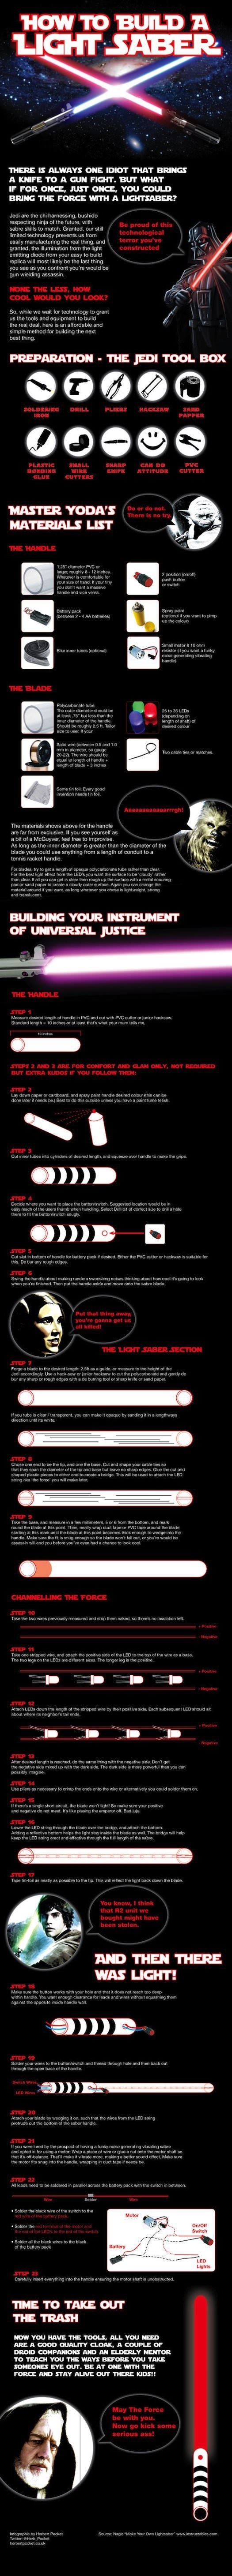 Build your own lightsaber